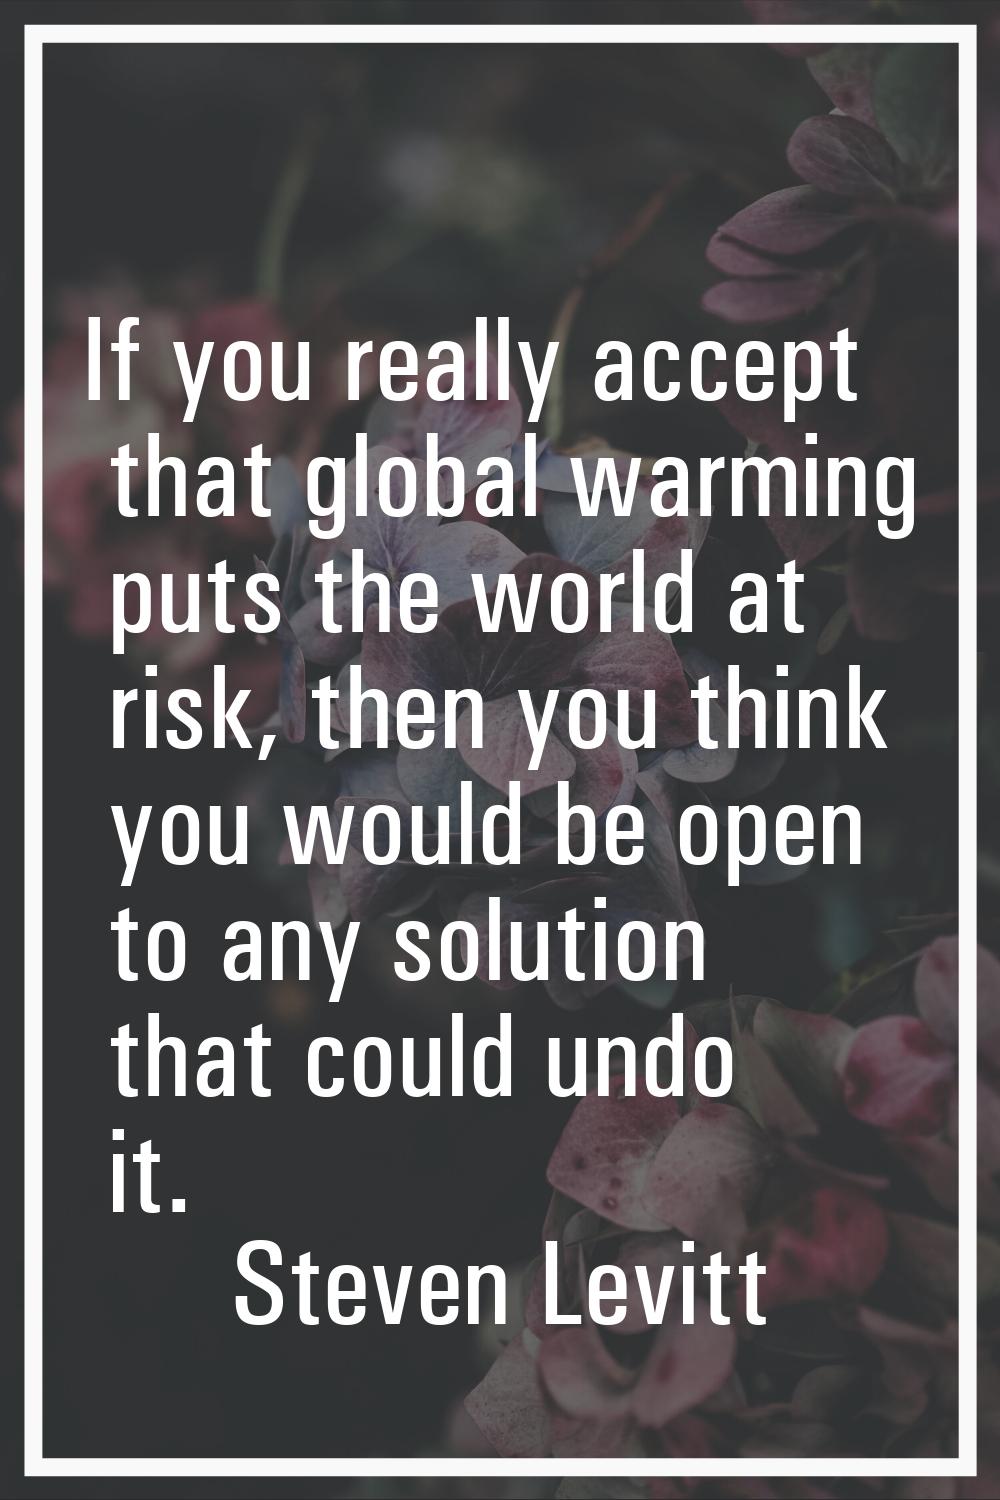 If you really accept that global warming puts the world at risk, then you think you would be open t